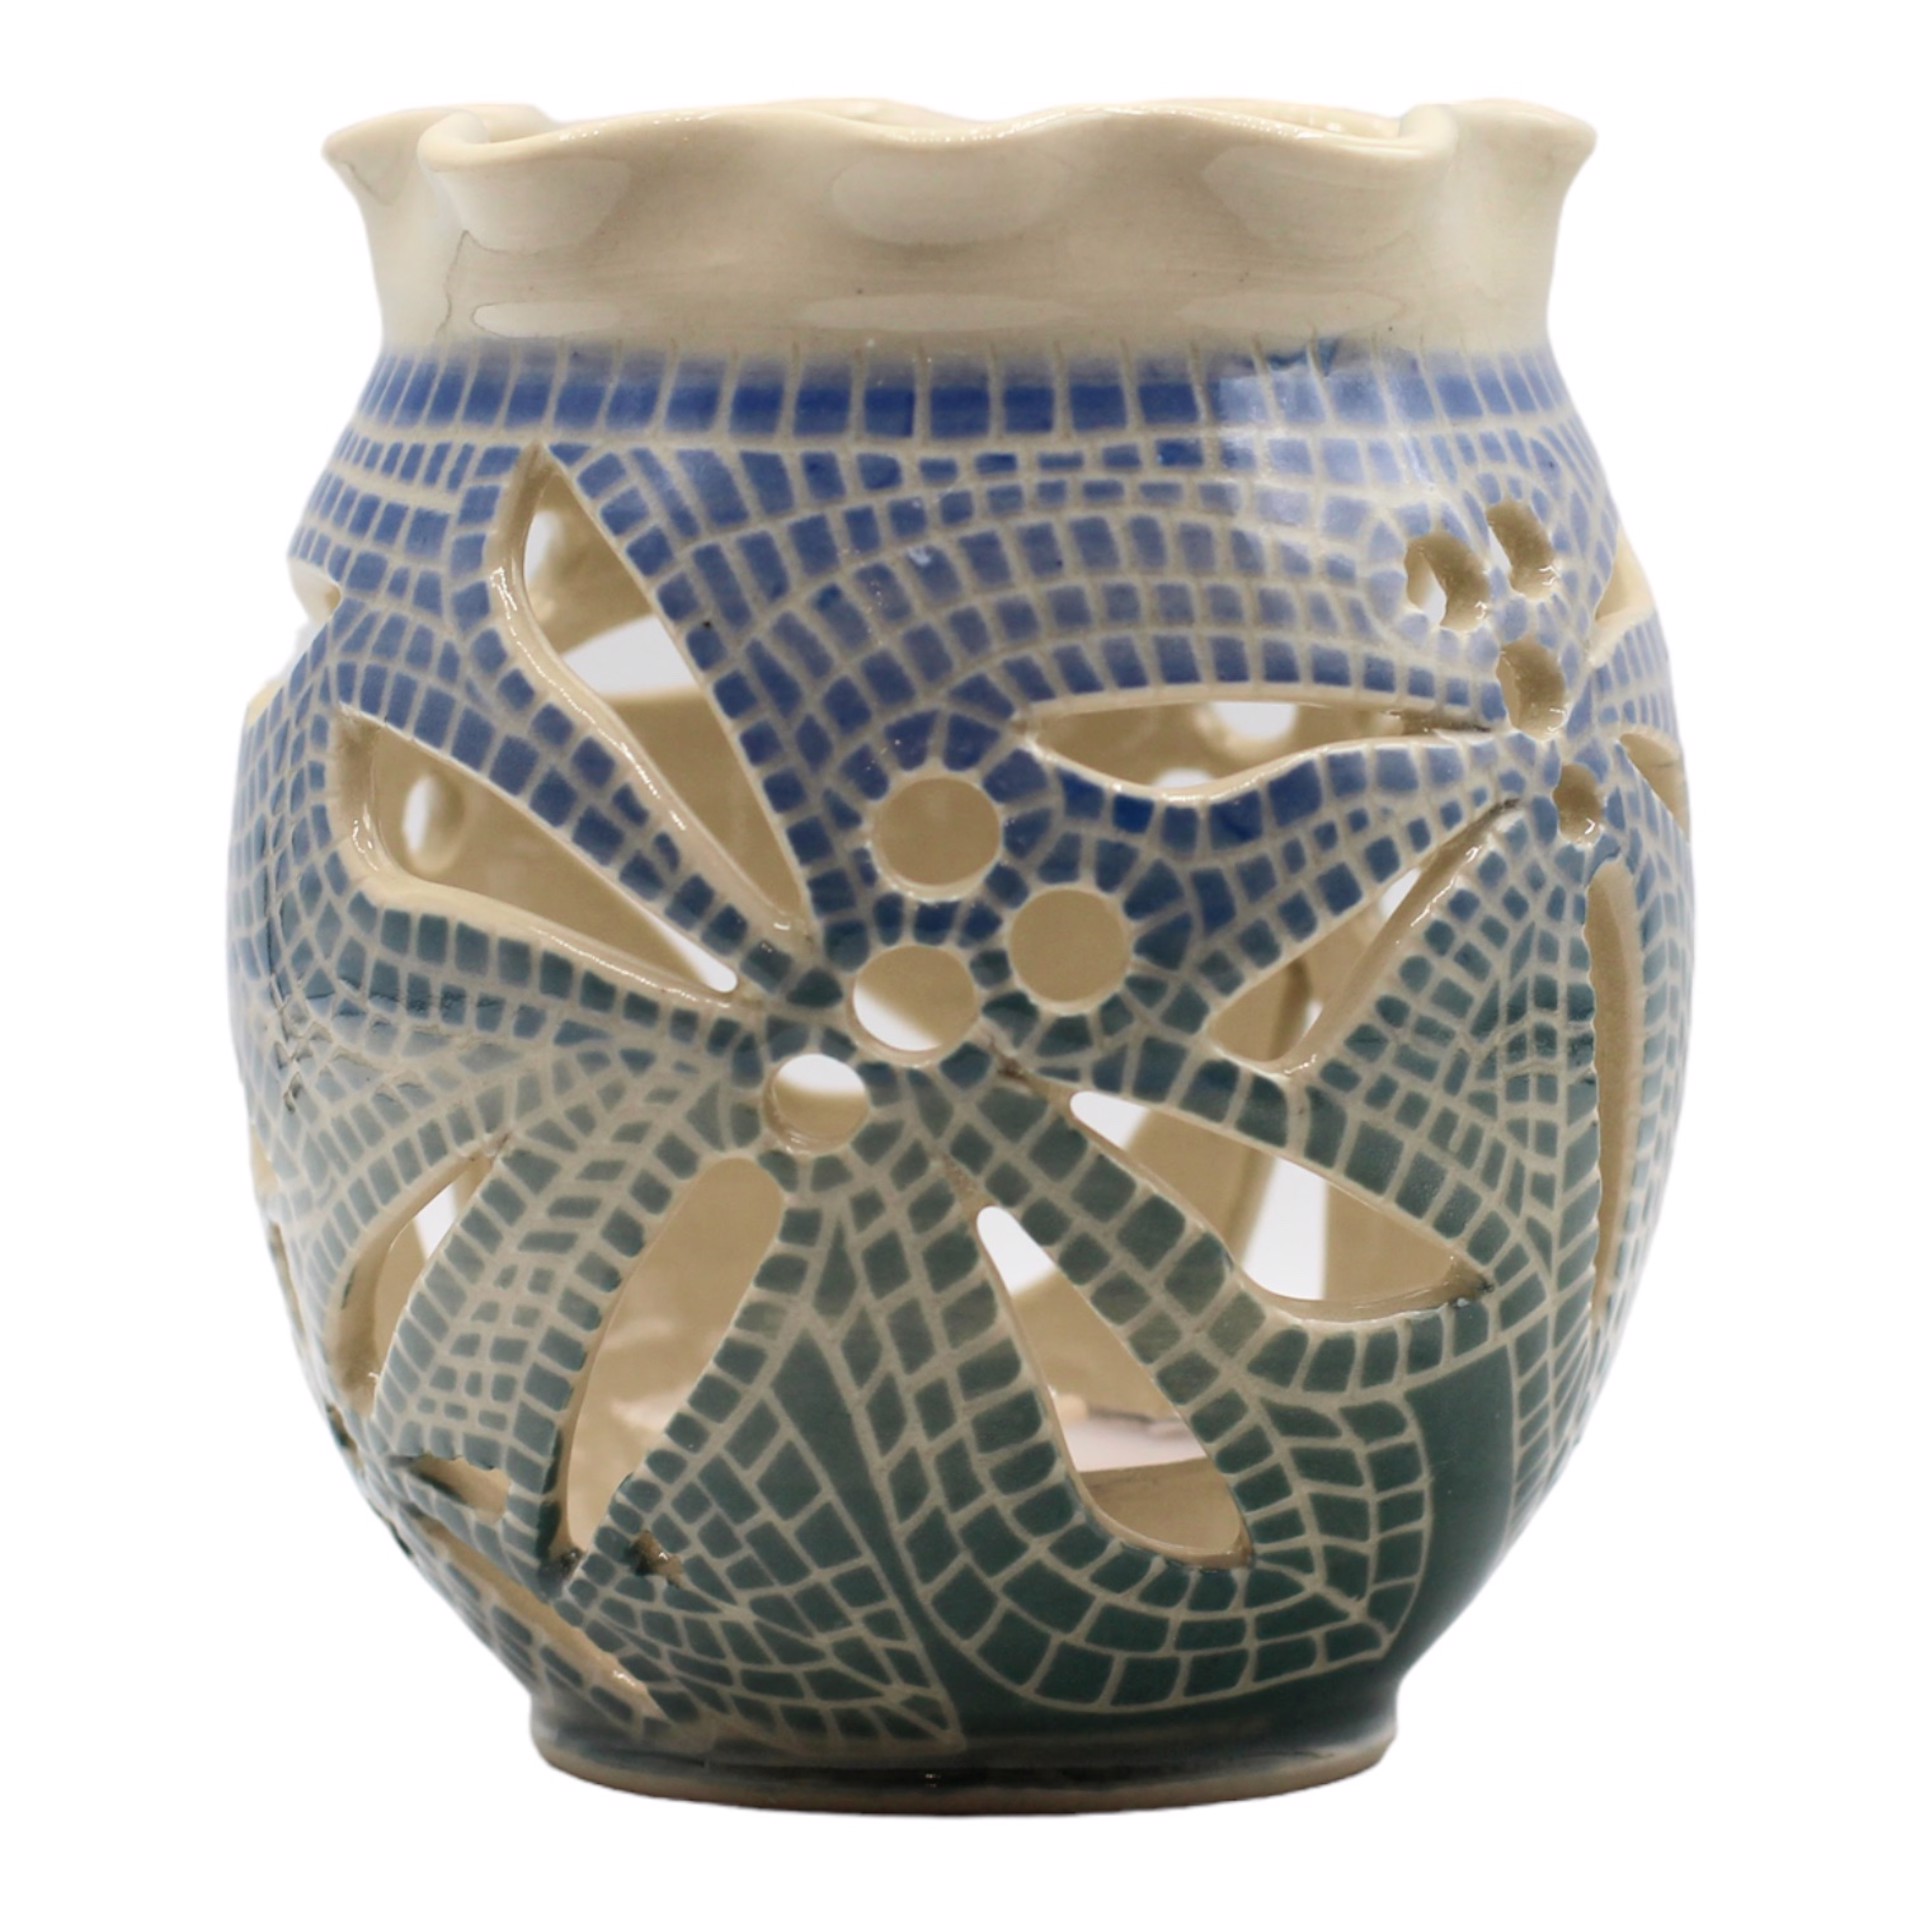 Dragonfly Sgraffito Large Candle Pot by Kelly Price